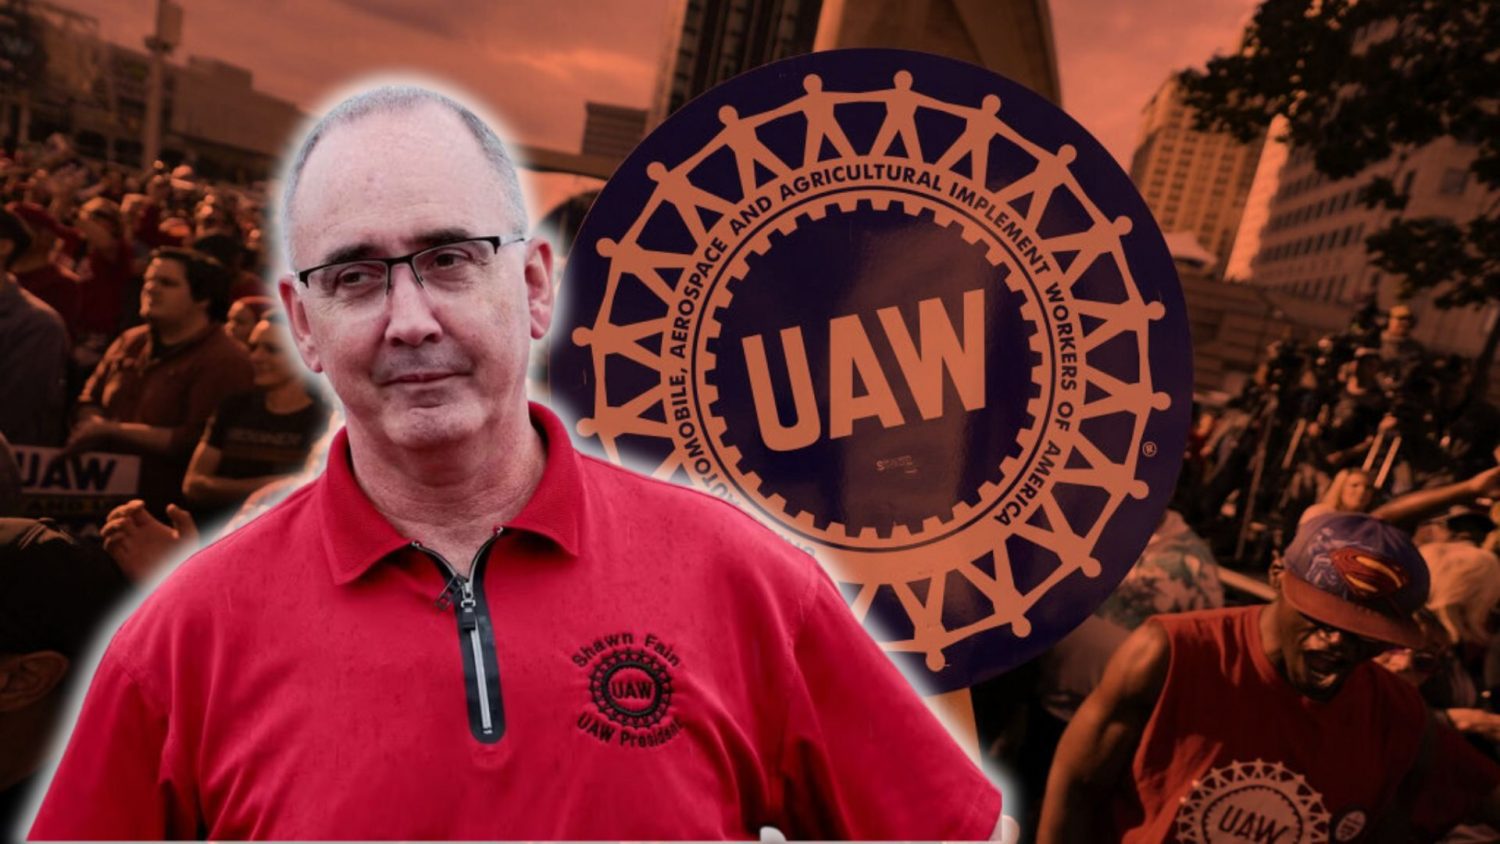 On Dec 11, the UAW Union filed unfair labor practice charges against Hyundai, Honda, and Volkswagen for interfering with organizing workers.